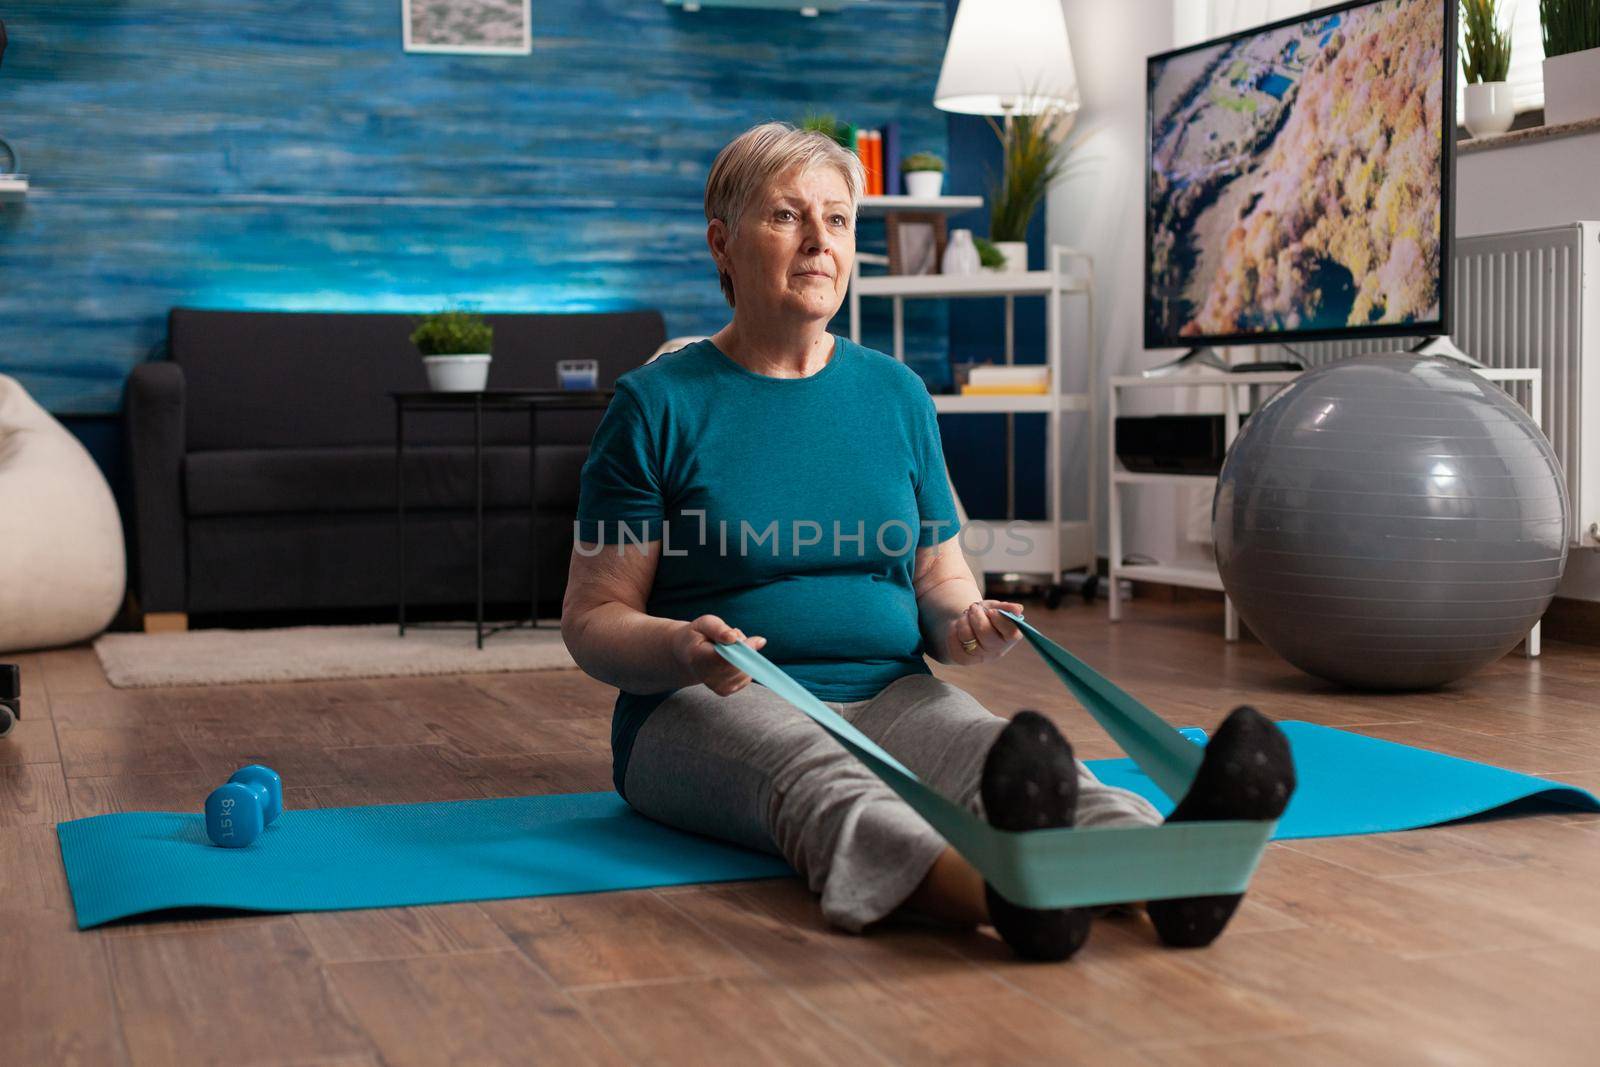 Retirement senior woman sitting on yoga mat stretching legs muscles using stretch elastic band training body resistance. Pensioner in sportswear slimming weight during muscle training in living room